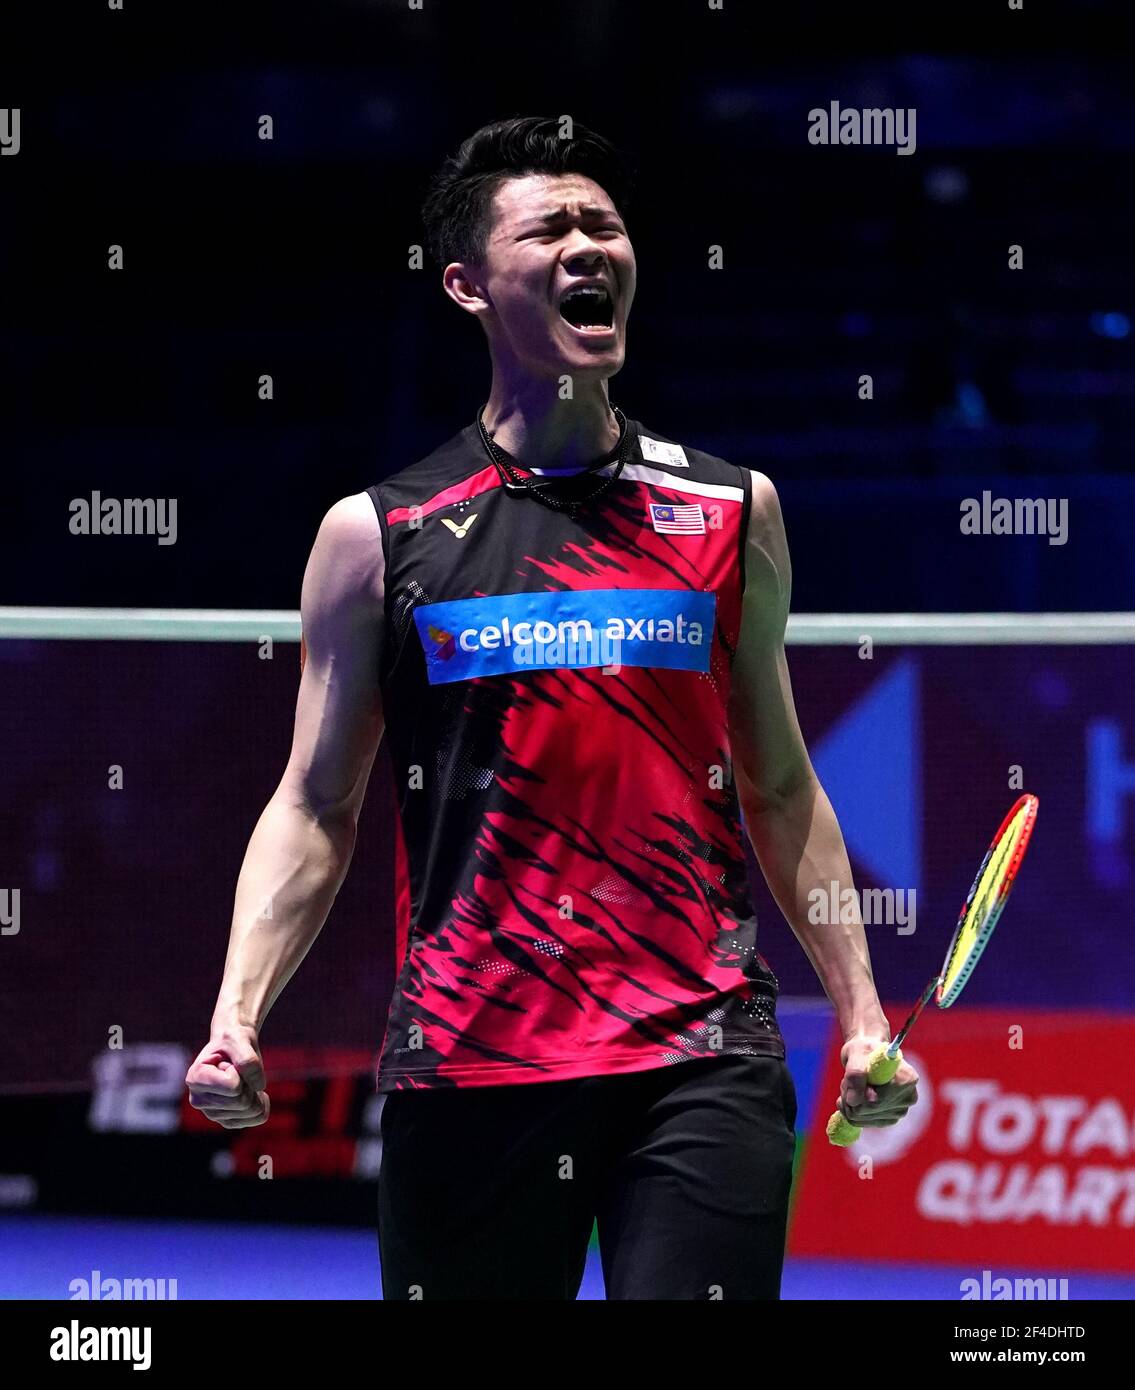 Malaysias Lee Zii Jia in action during his match against Netherlands Mark Carljouw on day four of the YONEX All England Open Badminton Championships at Utilita Arena Birmingham